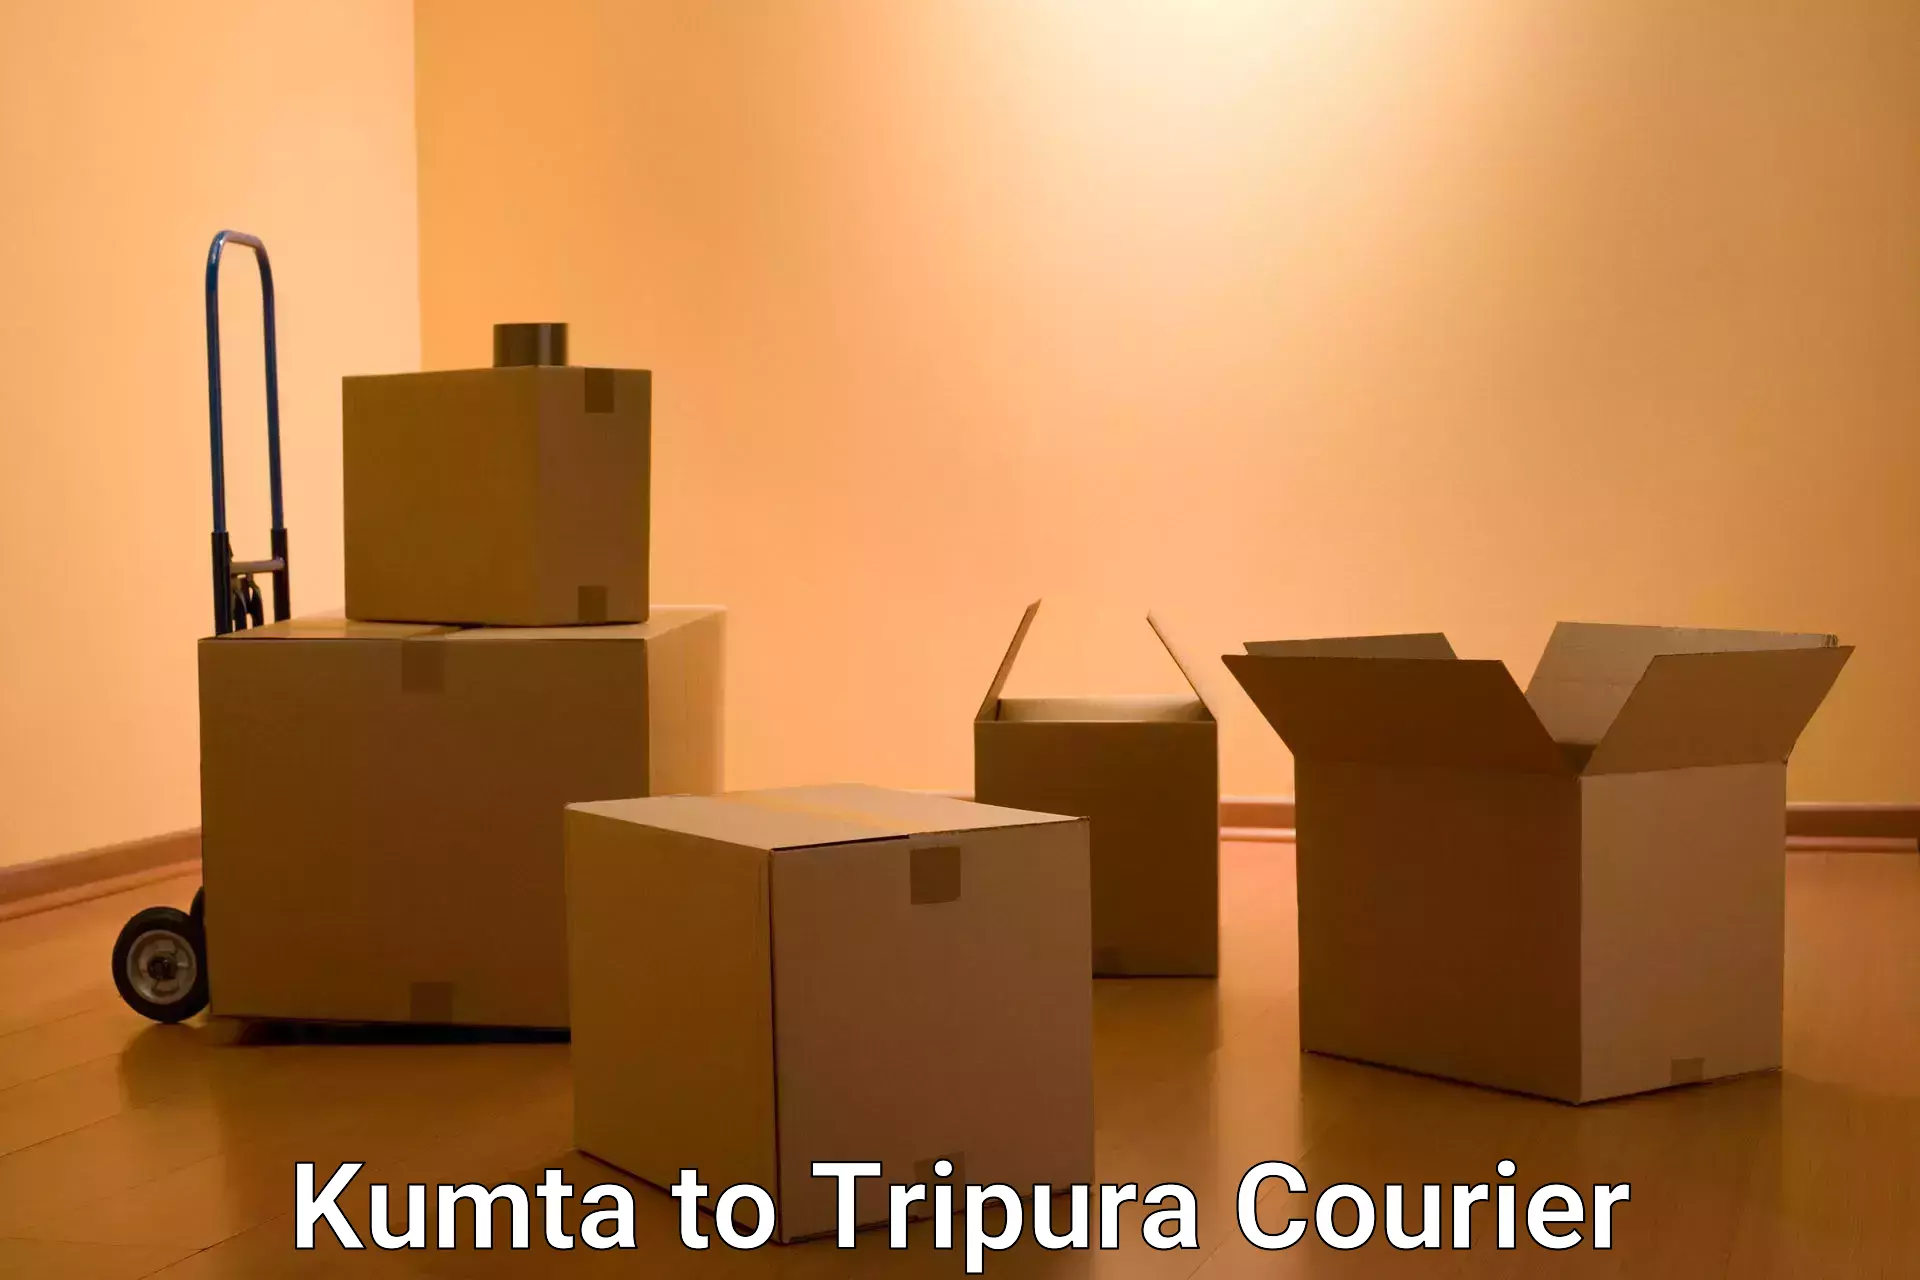 Express courier capabilities in Kumta to Udaipur Tripura